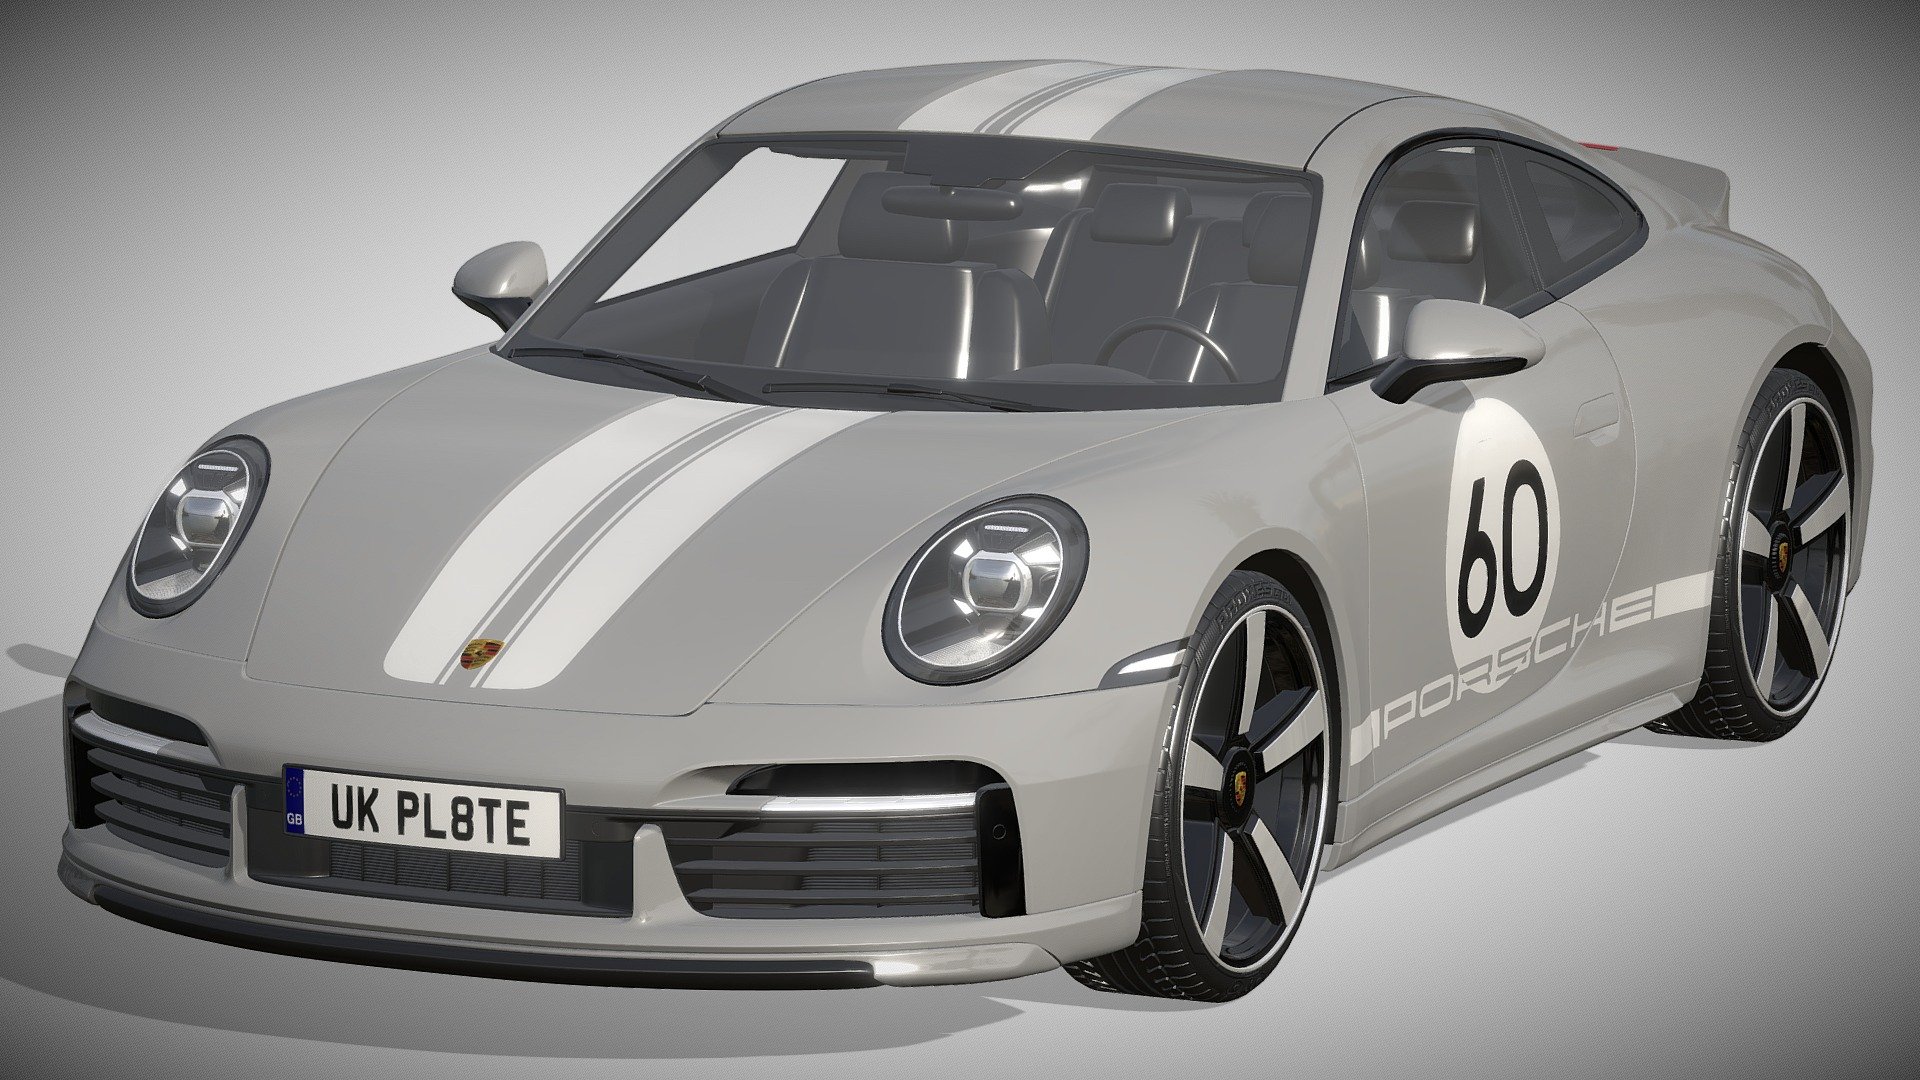 Porsche 911 Sport Classic 2023

https://www.porsche.com/usa/models/911/911-sport-classic/

Clean geometry Light weight model, yet completely detailed for HI-Res renders. Use for movies, Advertisements or games

Corona render and materials

All textures include in *.rar files

Lighting setup is not included in the file! - Porsche 911 Sport Classic 2023 - Buy Royalty Free 3D model by zifir3d 3d model